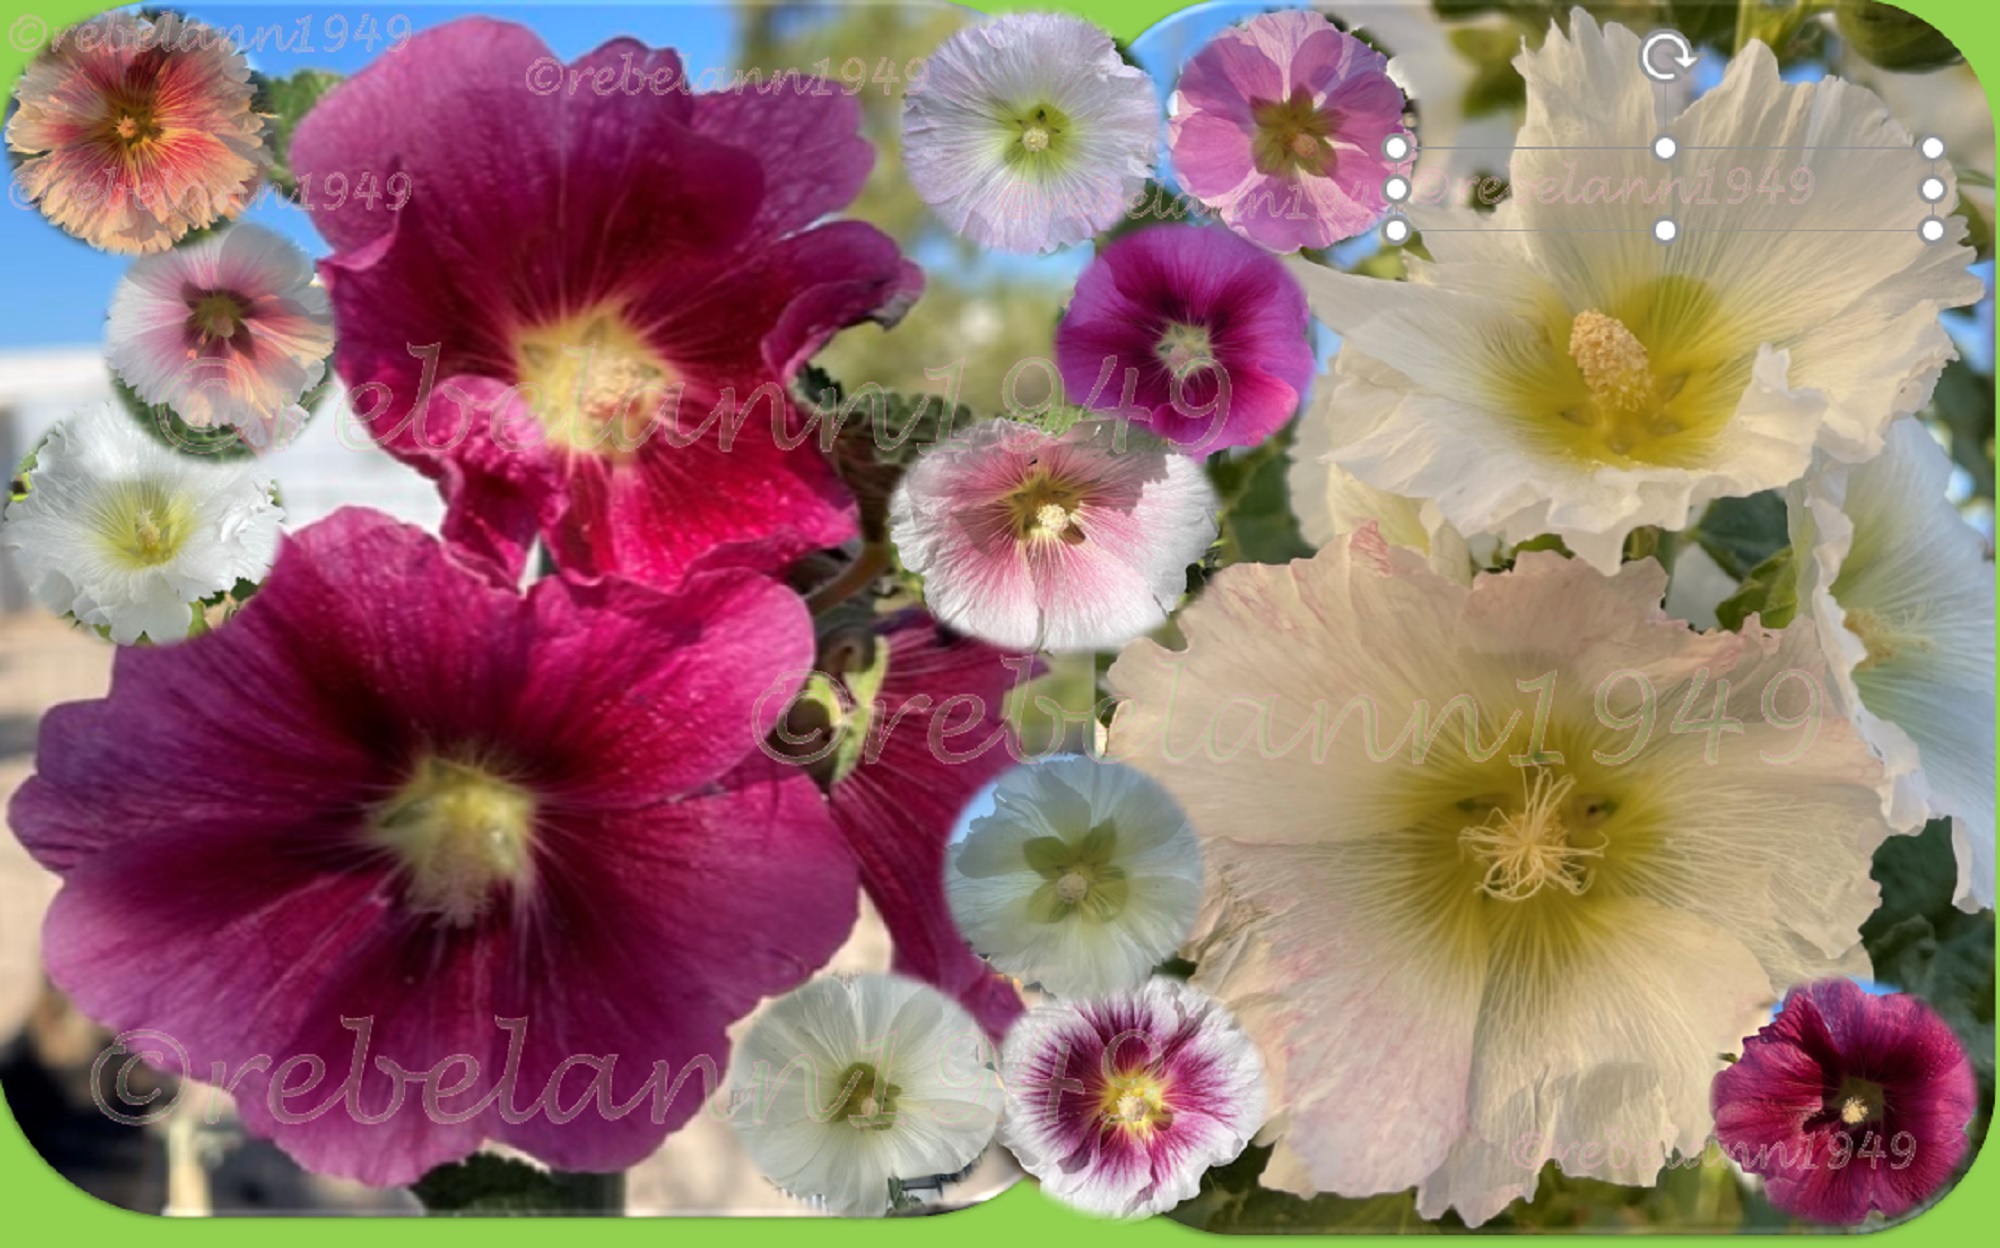 Just a collage of the many hollyhocks I&#039;ve gotten